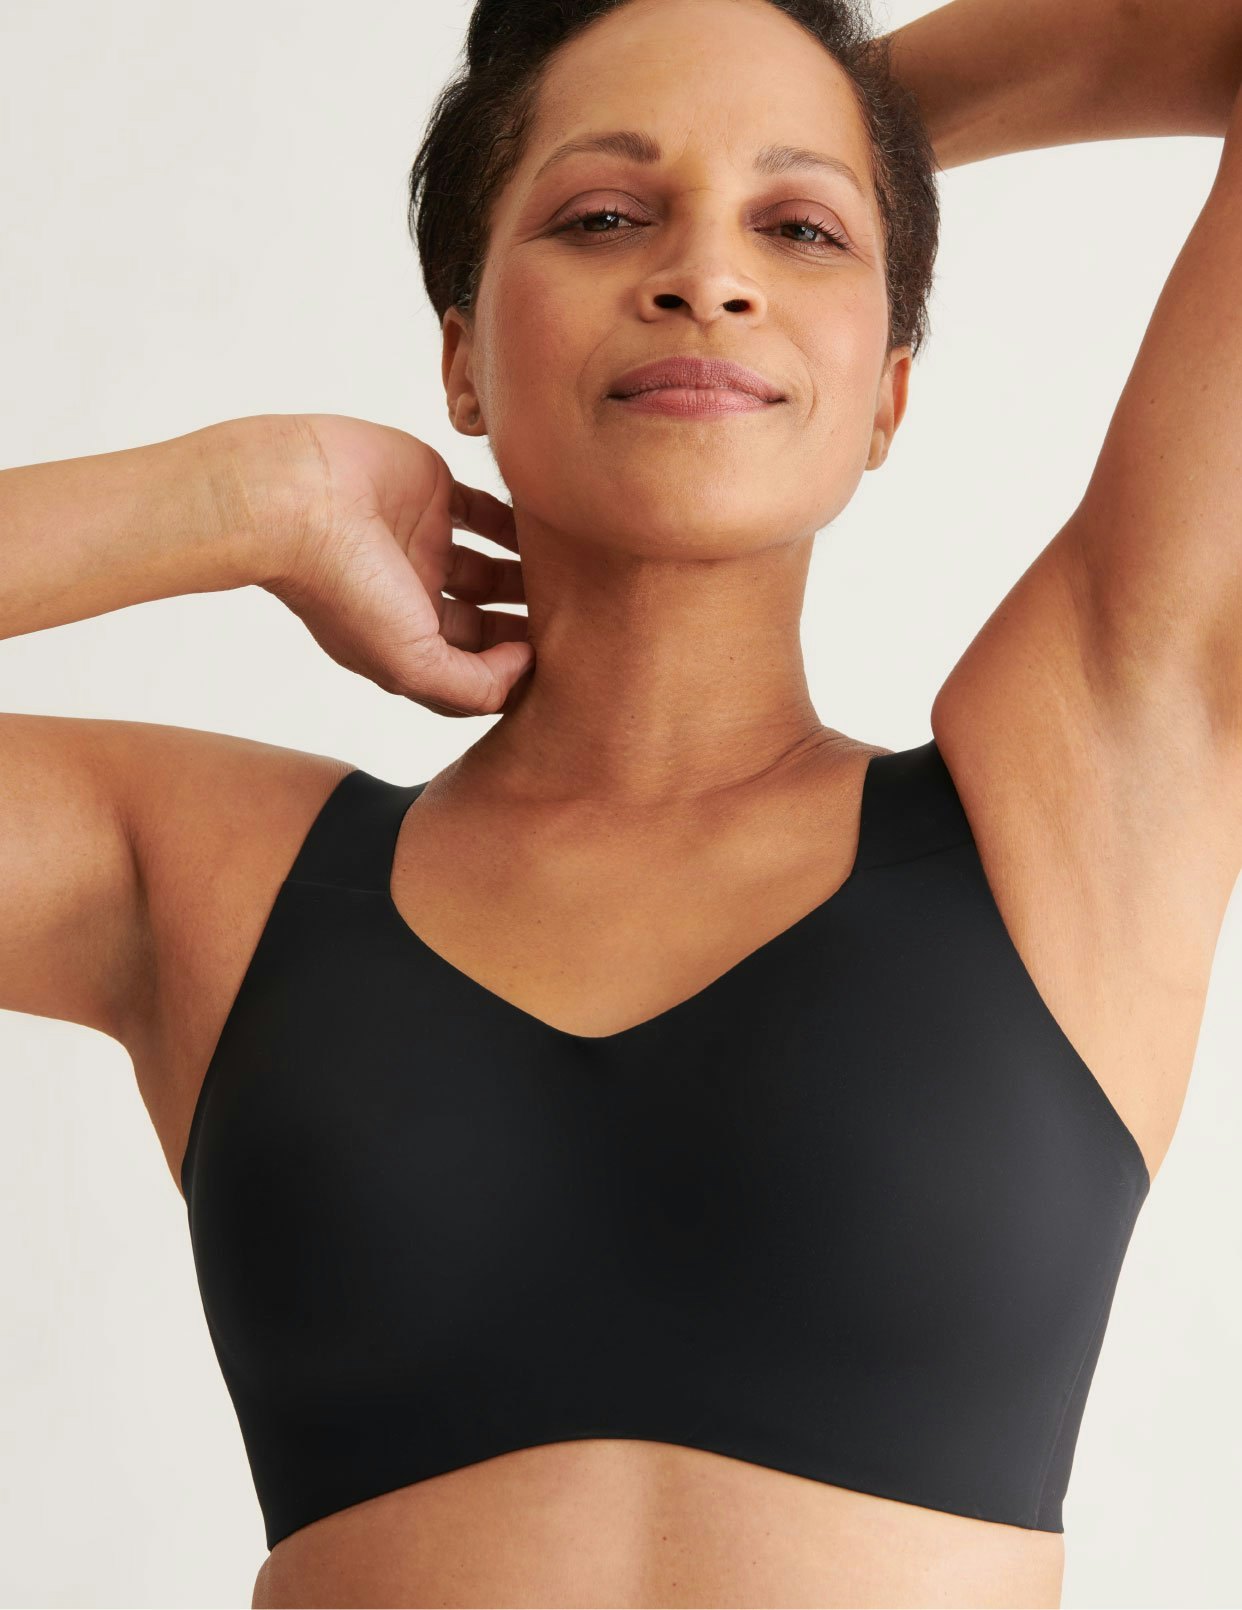 hidden side and under-bust support, the Moving Comfort Jubralee